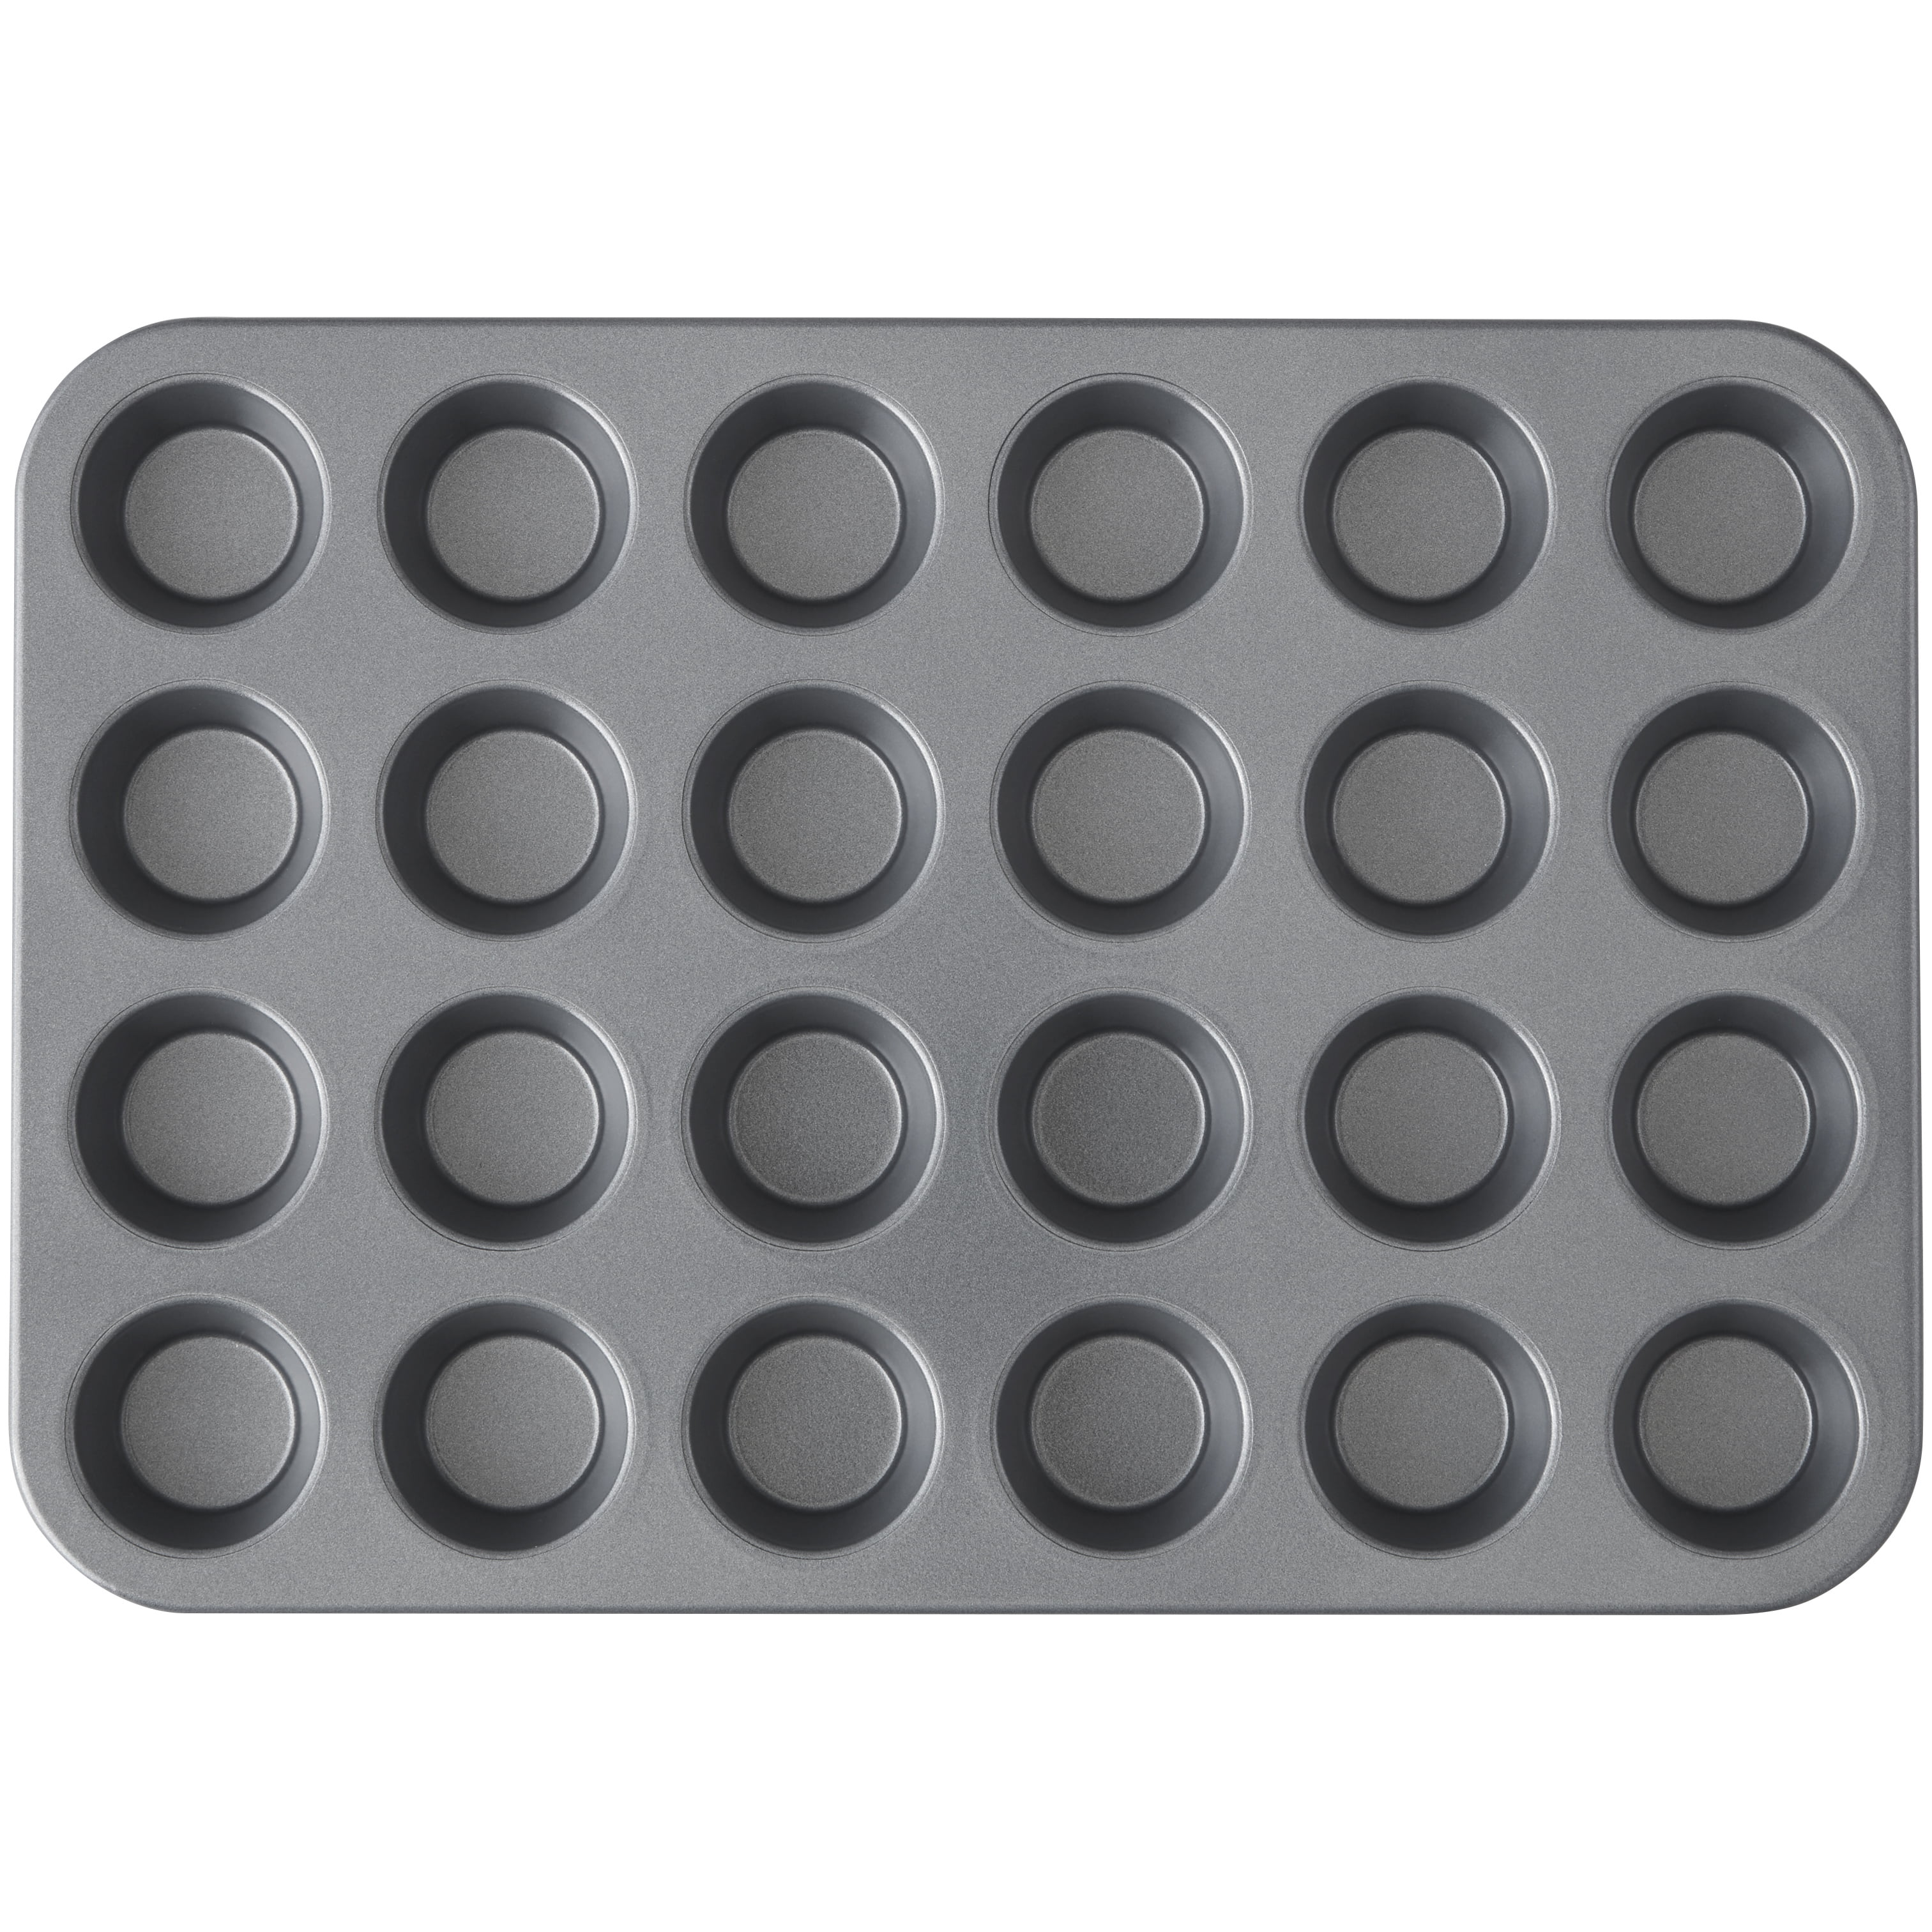 Wilton Bake it Simply Extra Large Non-Stick Mini Muffin Pan, 24-Cup